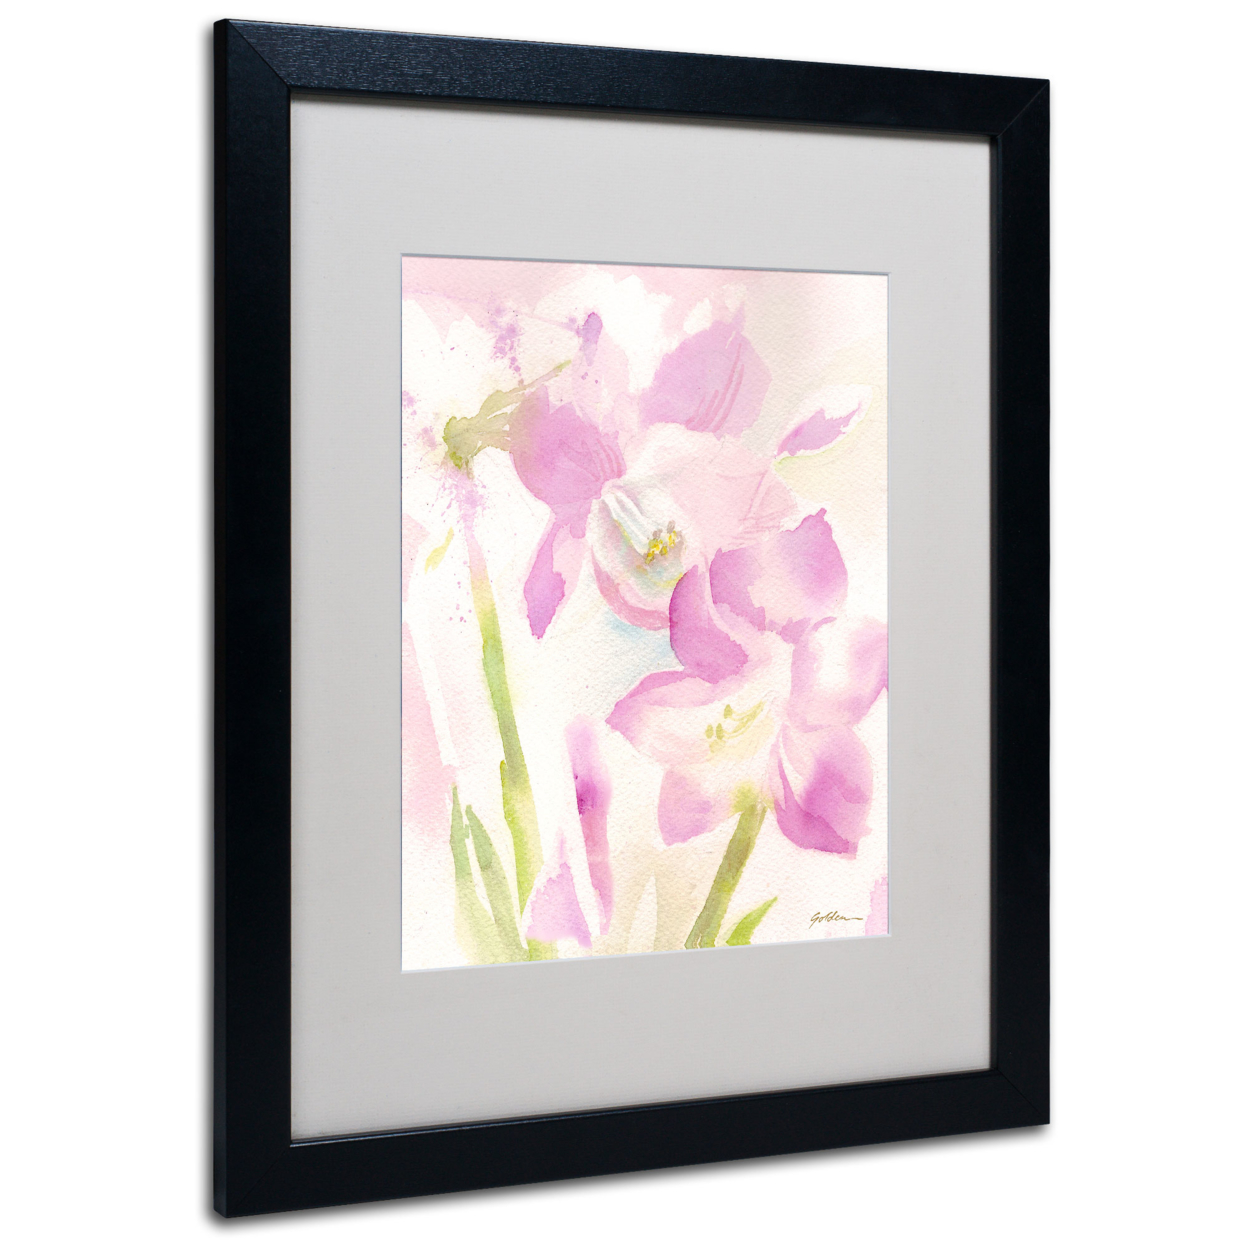 Sheila Golden 'Amaryllis Blossoming' Black Wooden Framed Art 18 X 22 Inches